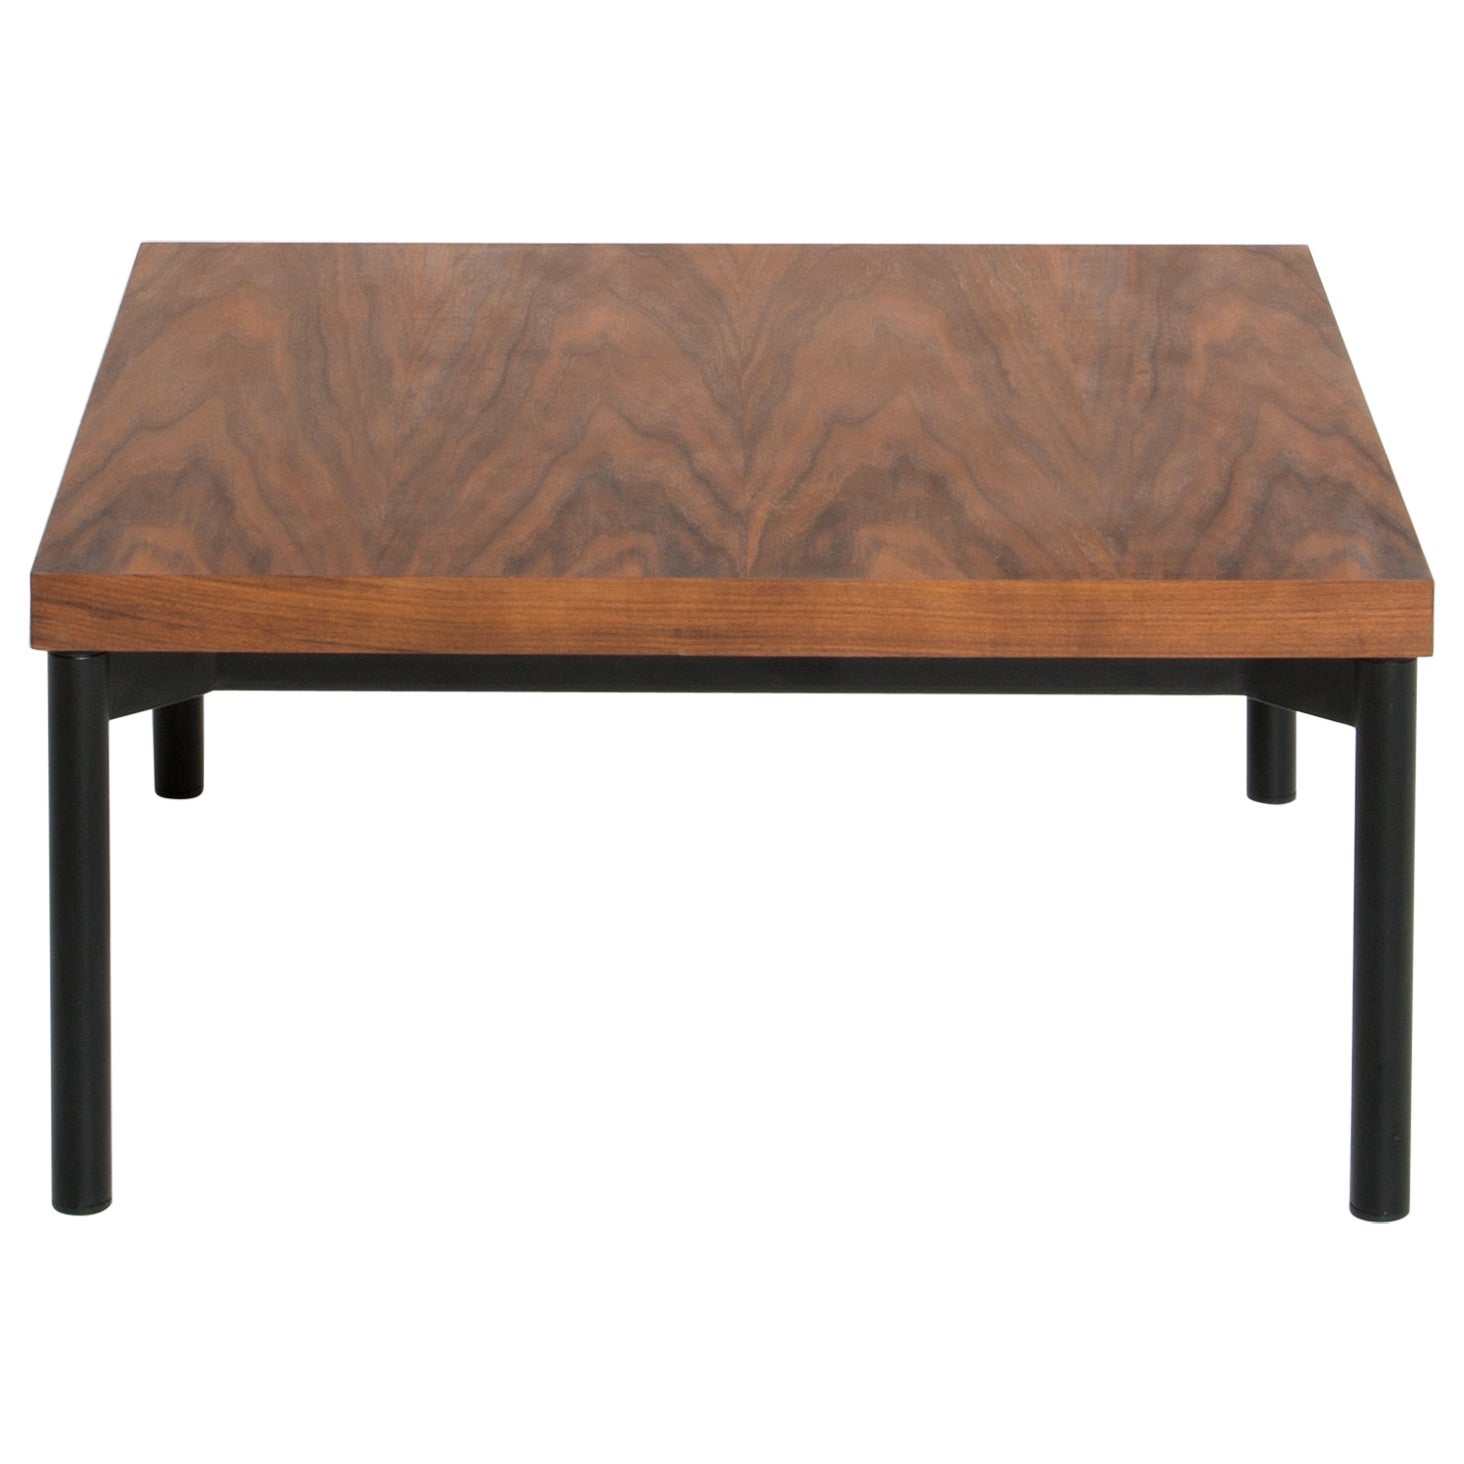 Petite Friture Grid Coffee Table in Walnut by Studio Pool, 2015 For Sale